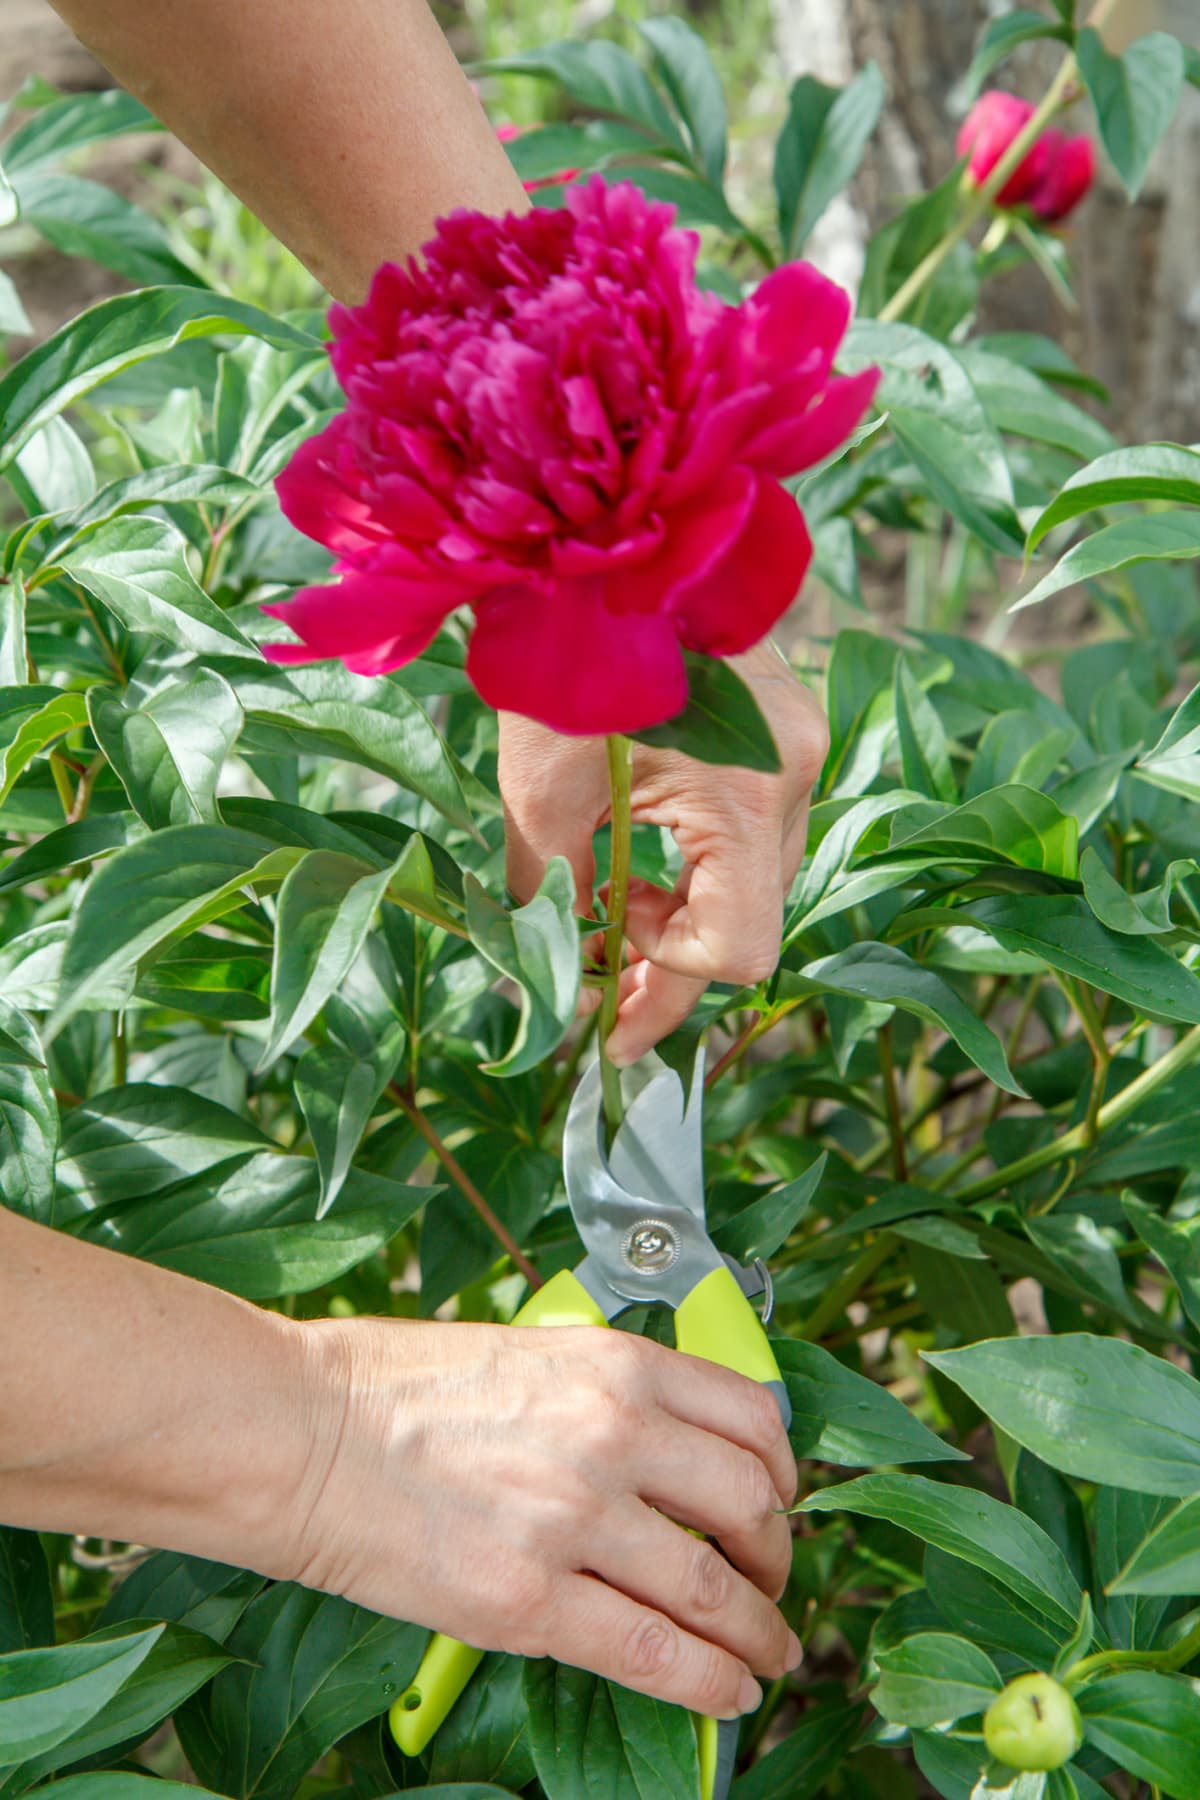 Gardener with pruner shears trimming a red peony flower